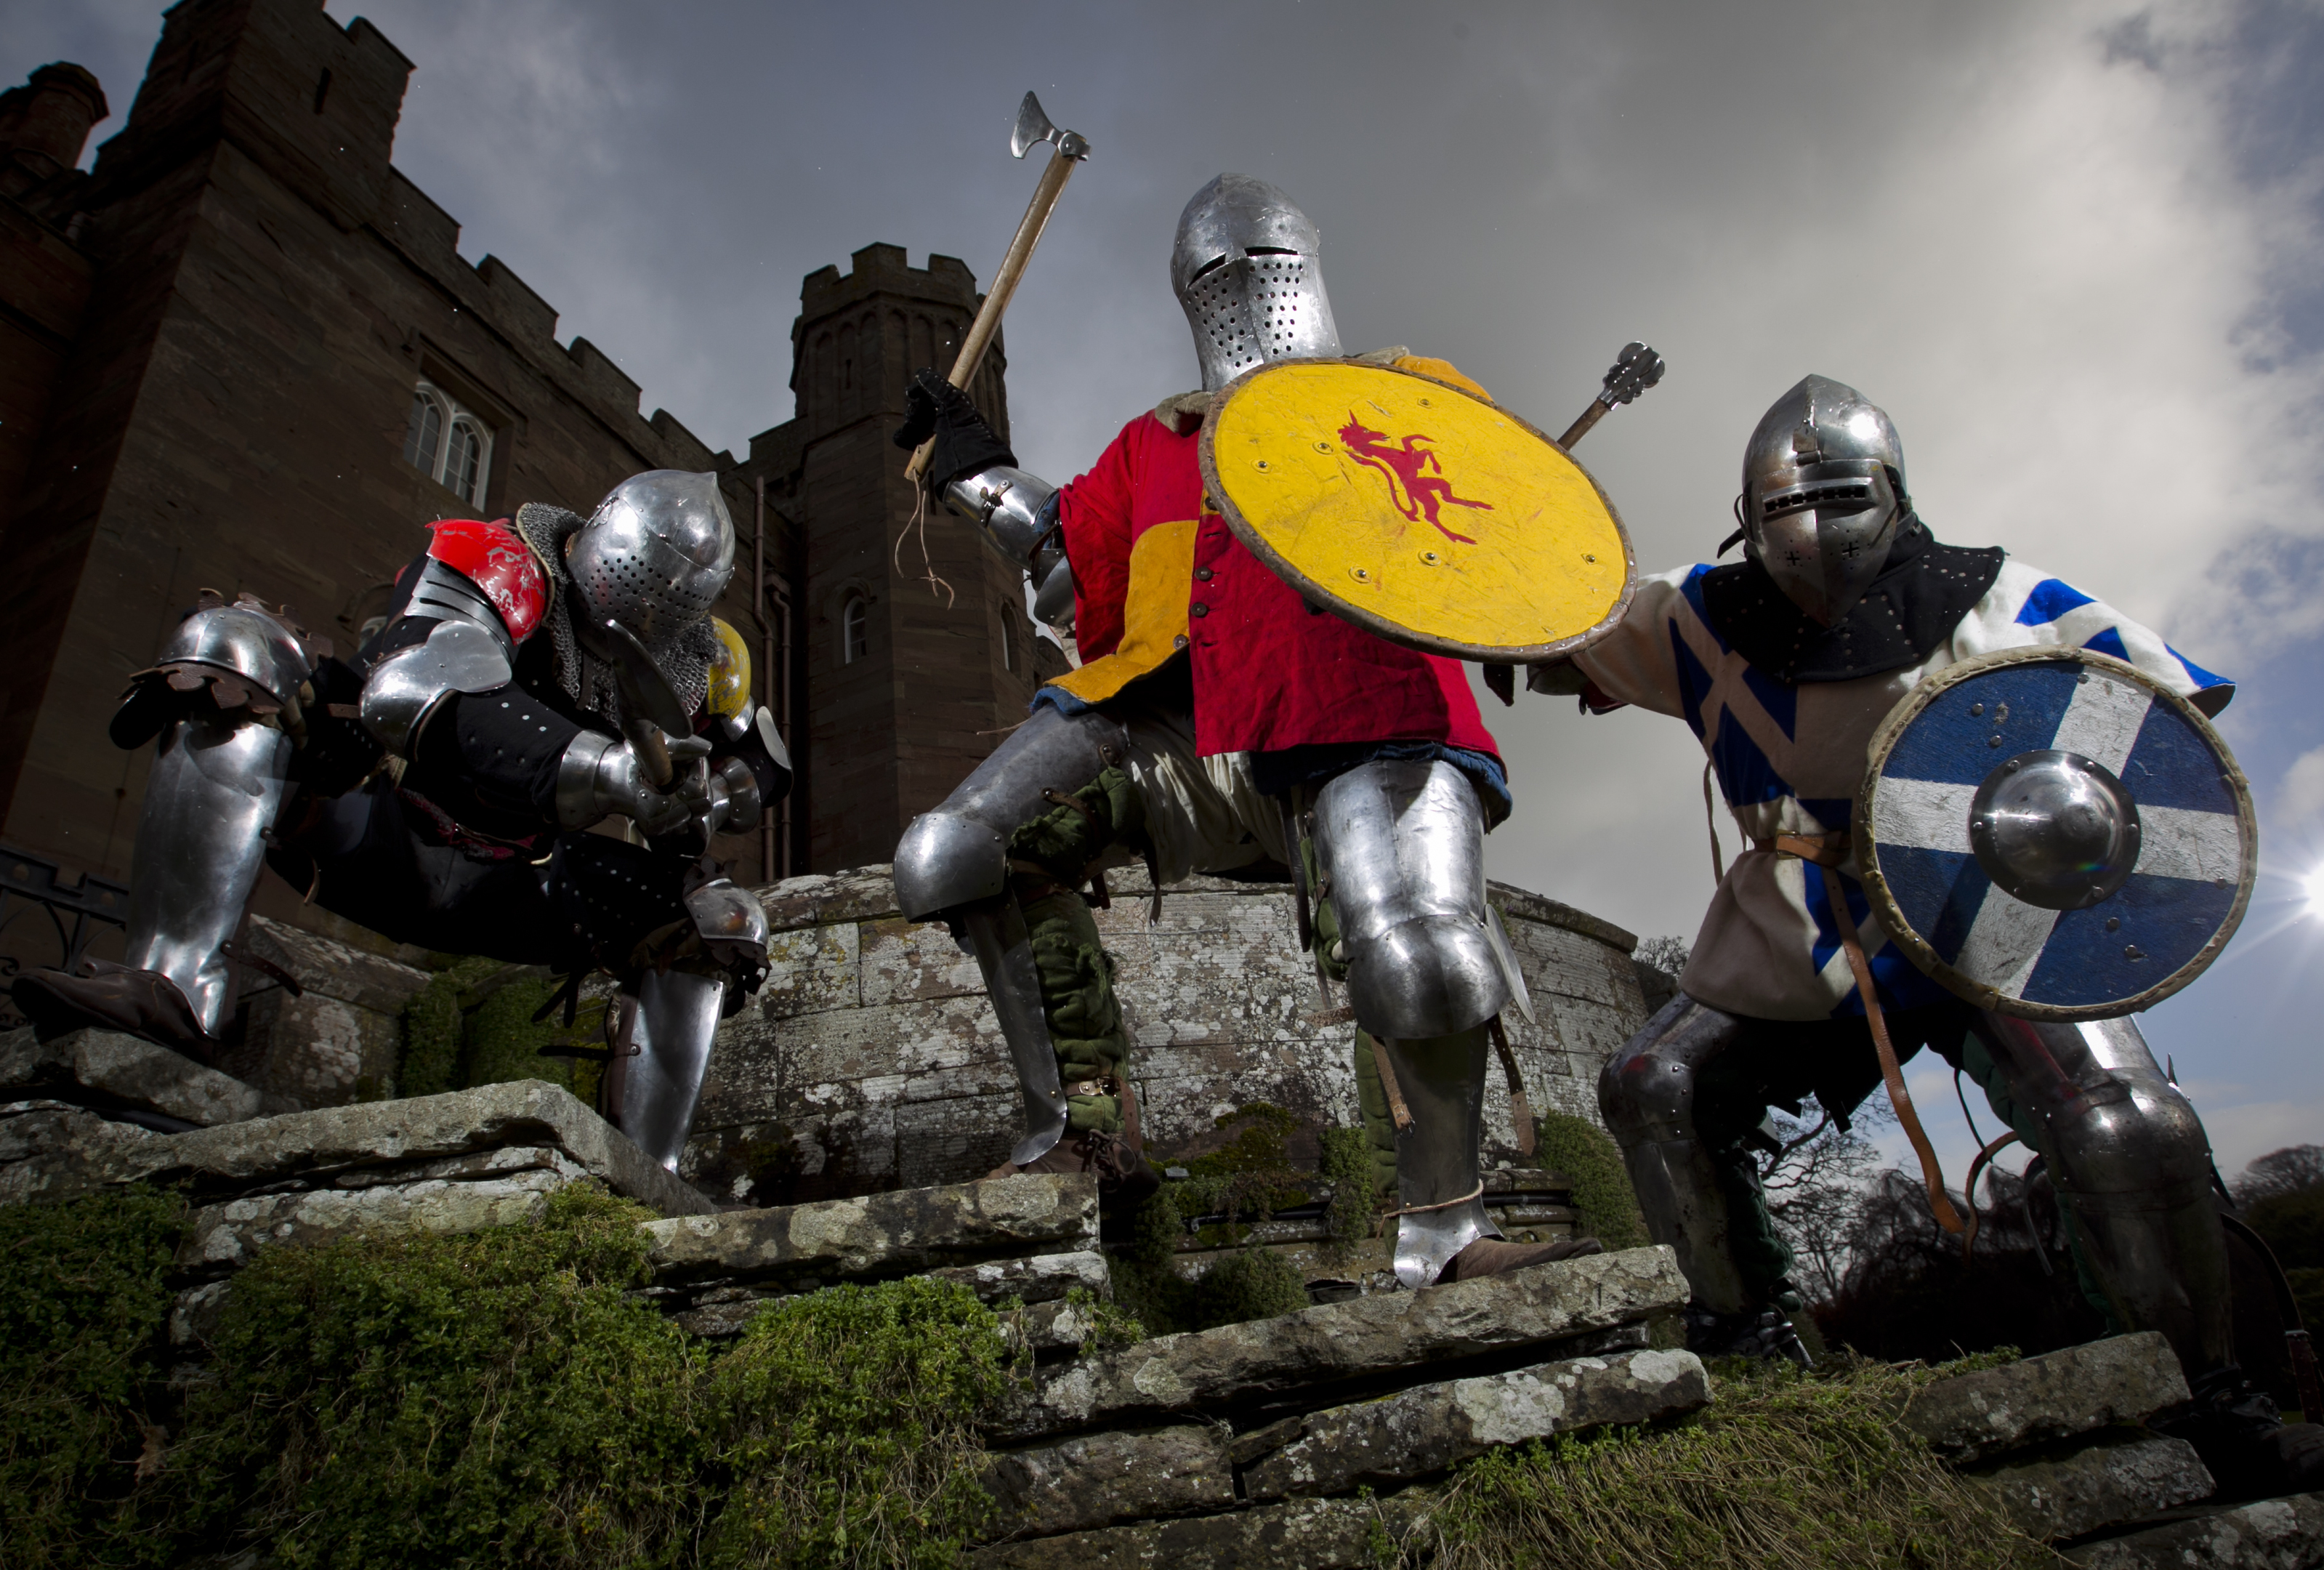 Members of the Scottish Knight League, in training at Scone Palace, as they will be competing at the International Medievel Combat Federation World Championships at Scone Palace in May this year. (Ryan Fitzpatrick, Euan Campbell (captain), Ralph Campbell-Smith) (Andrew Cawley/DC Thomson)